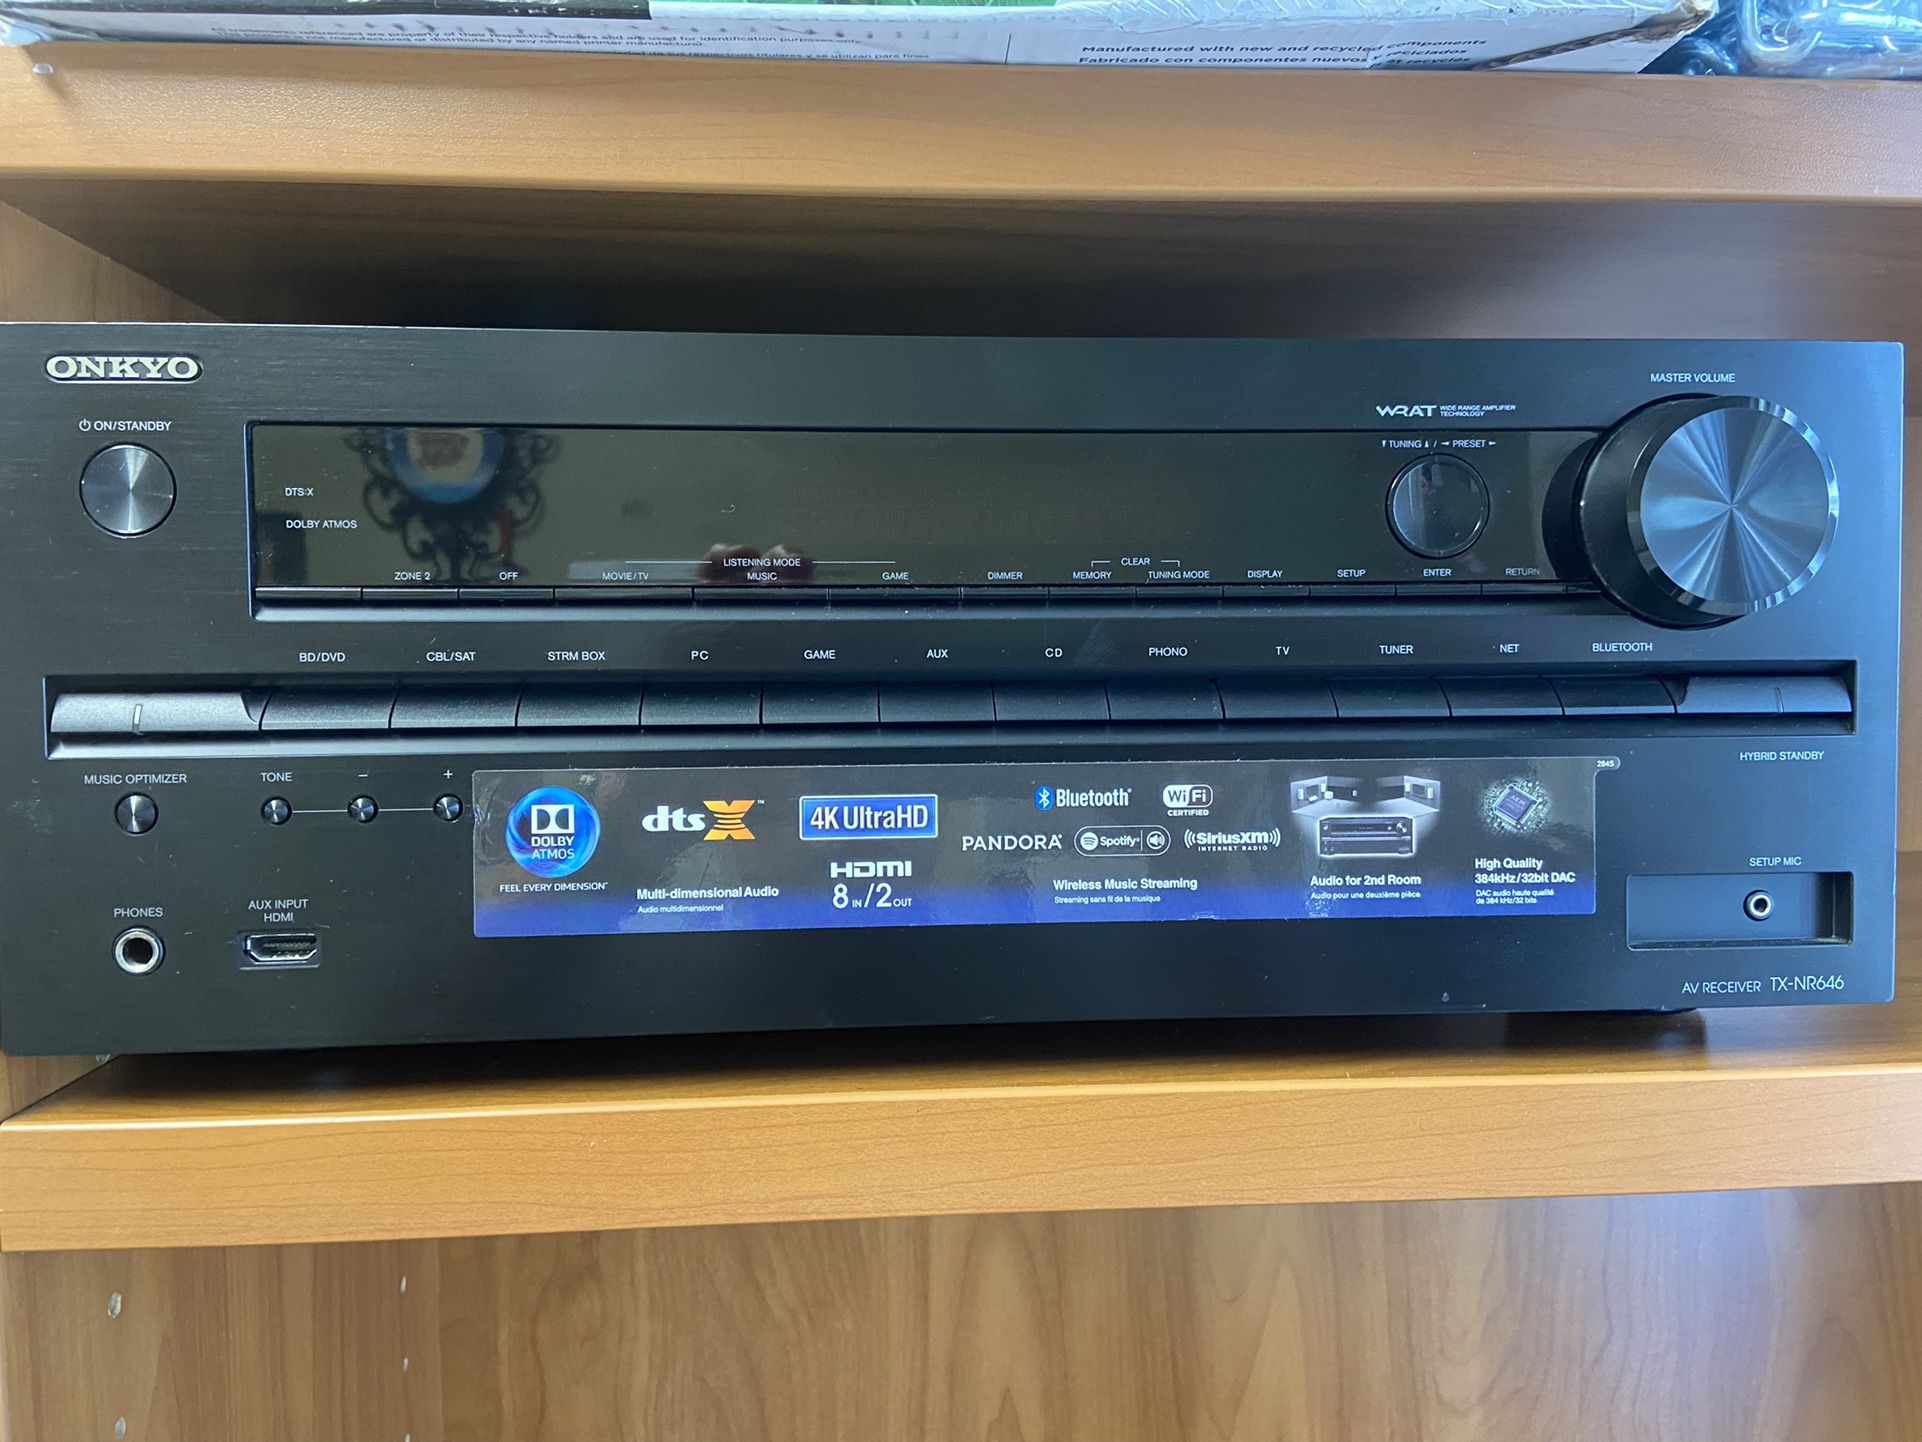 Onkyo Receiver TX-NR646 Home Theater With WIFI And Bluetooth. Apple Airplay And Dolby Atmos. 100 Watts Per Channel.